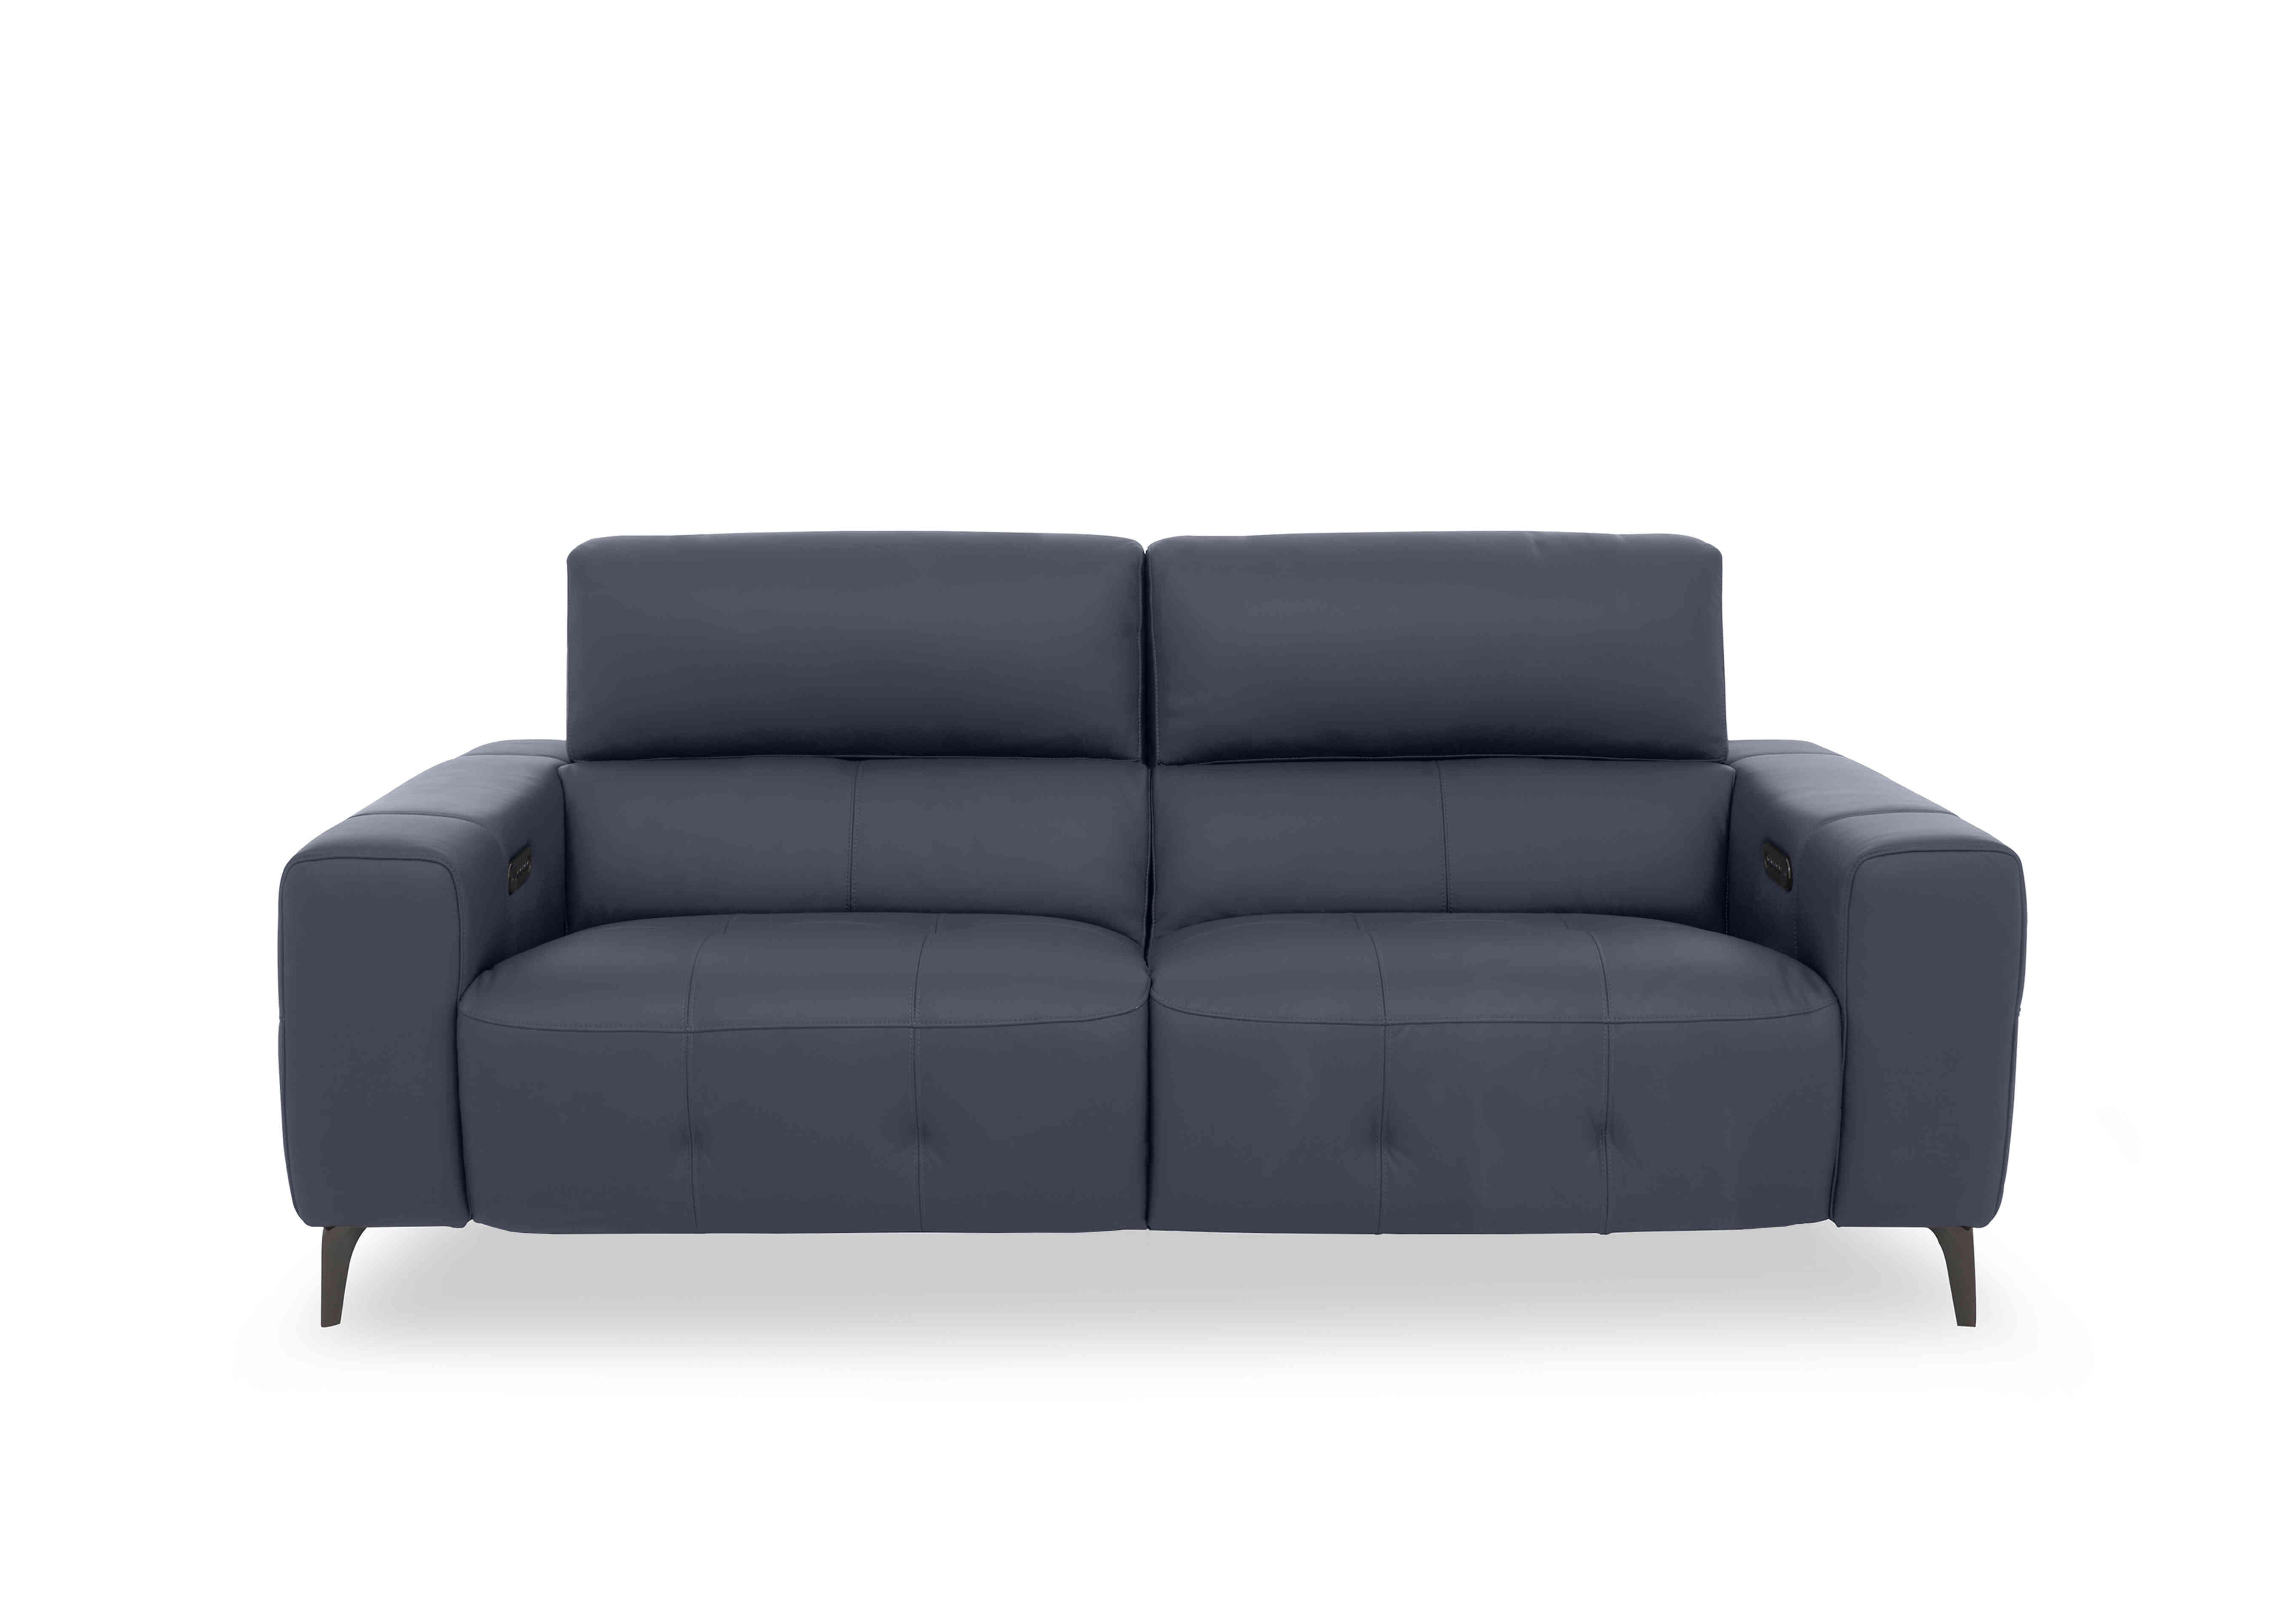 New York 3 Seater Leather Sofa in Bv-313e Ocean Blue on Furniture Village